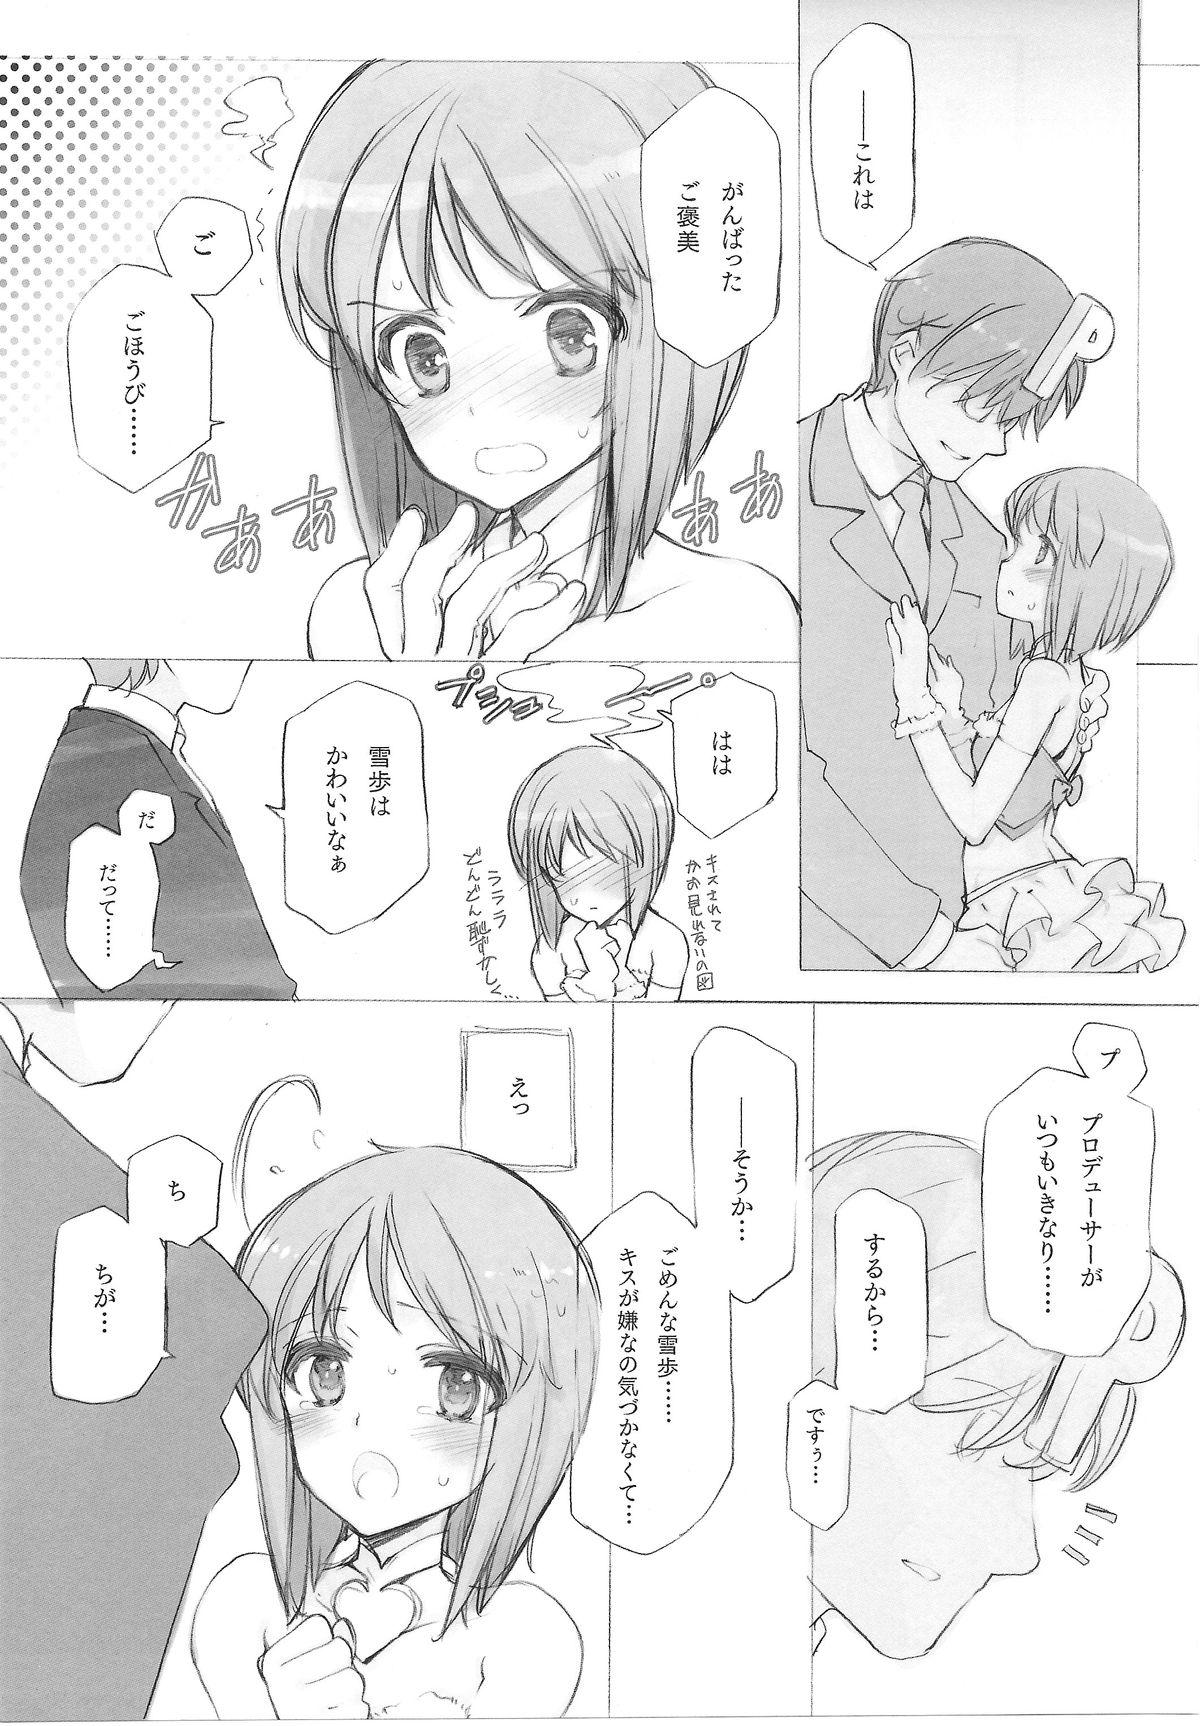 And IDOLTIME COMICS COLLECTION - The idolmaster Squirters - Page 6